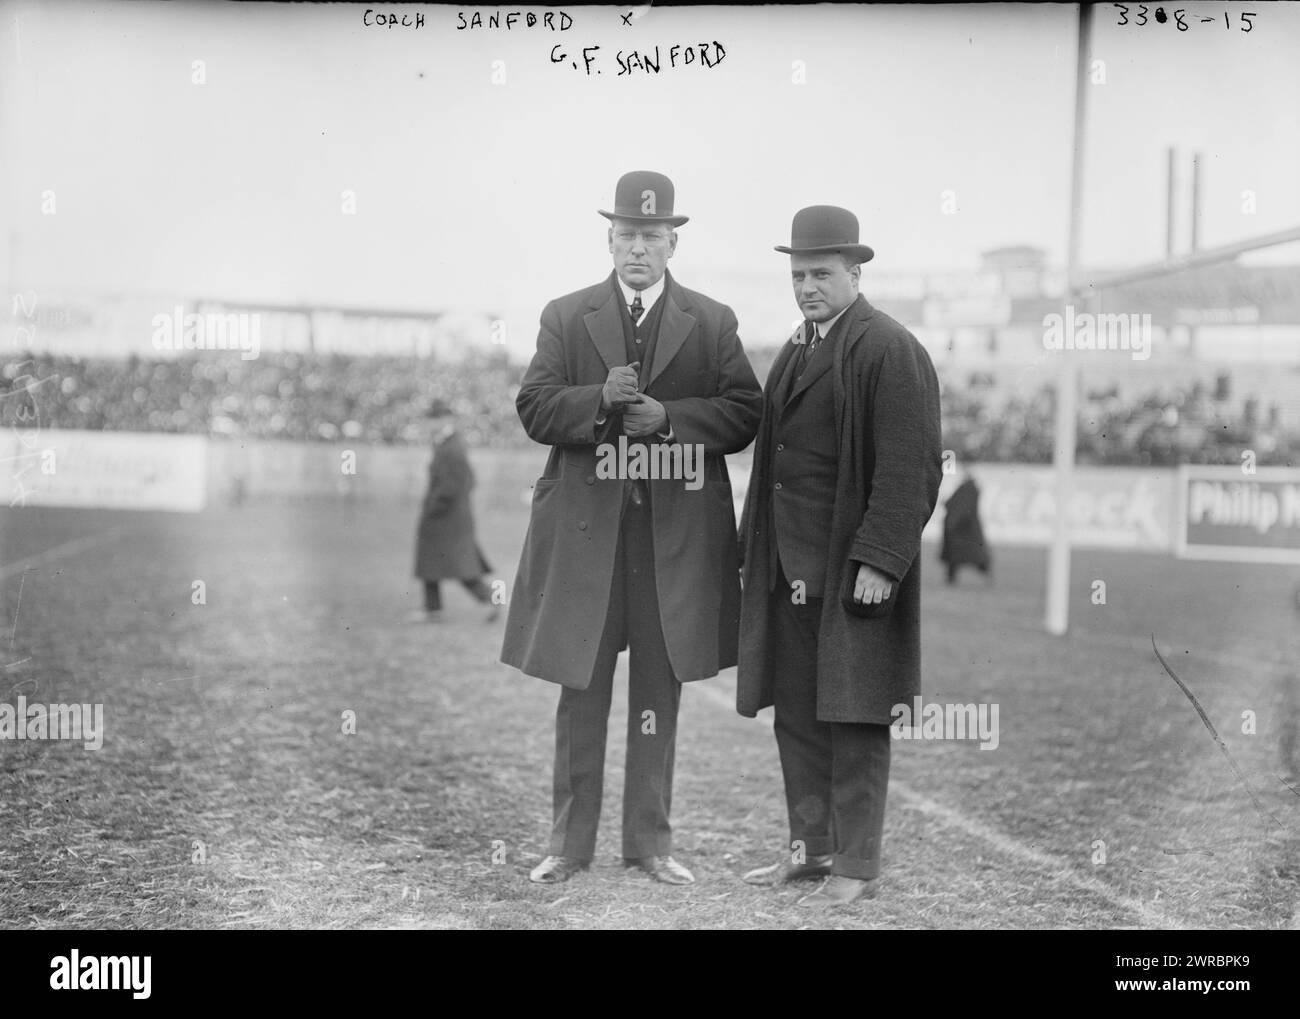 Coach Sanford, G.F. Sanford, Photograph shows George Foster Stanford (1870-1938), coach of the Rutgers football team from 1913 to 1923. Photograph was probably taken at the Washington & Jefferson vs. Rutgers football game which took place at the Polo Grounds in New York City on November 28, 1914., 1914 Nov. 26, Glass negatives, 1 negative: glass Stock Photo